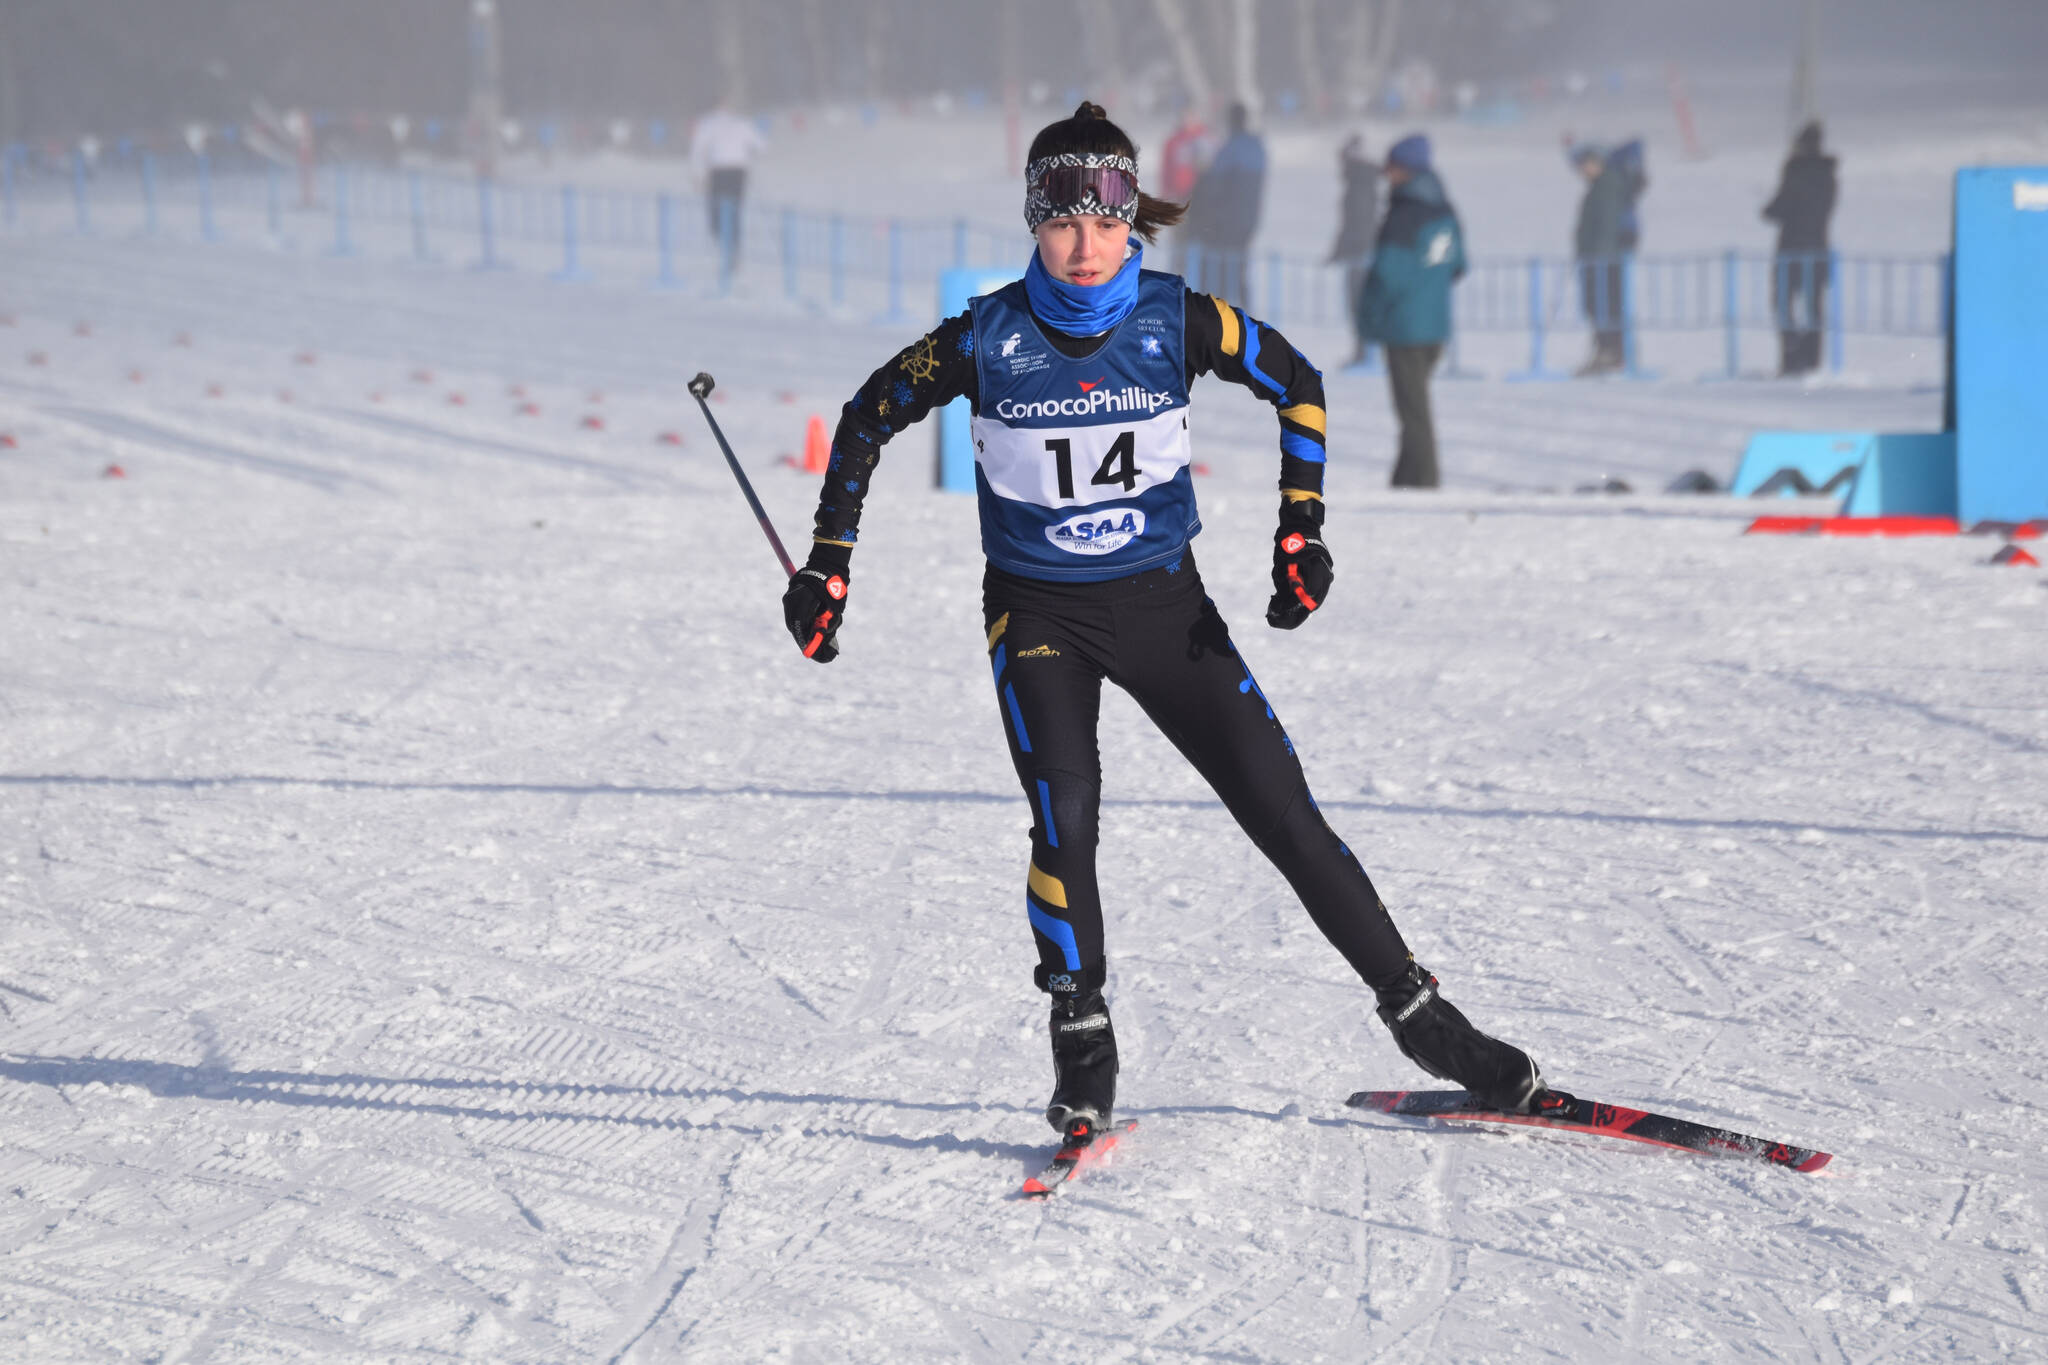 Eryn Field, of Homer, sets out on the last leg of the girls 4x3.5-kilometer relay at the ASAA State Nordic Ski Championships at Kincaid Park in Anchorage, Alaska, on Saturday, Feb. 25, 2023. (Jake Dye/Peninsula Clarion)